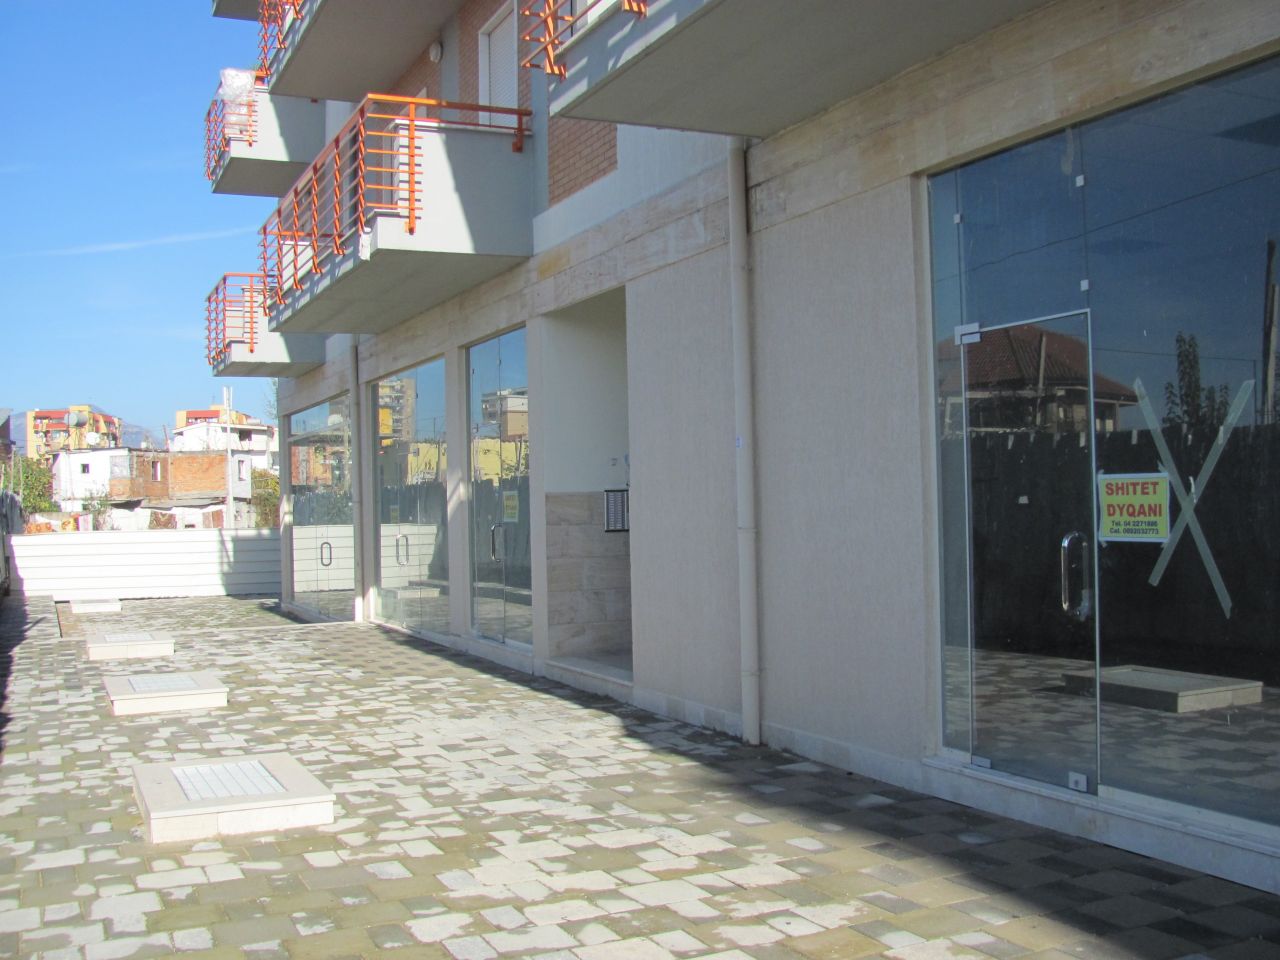 Apartment for Sale in Komuna Parisit, in Tirana, offered by Albania Property Group. The quality is good.